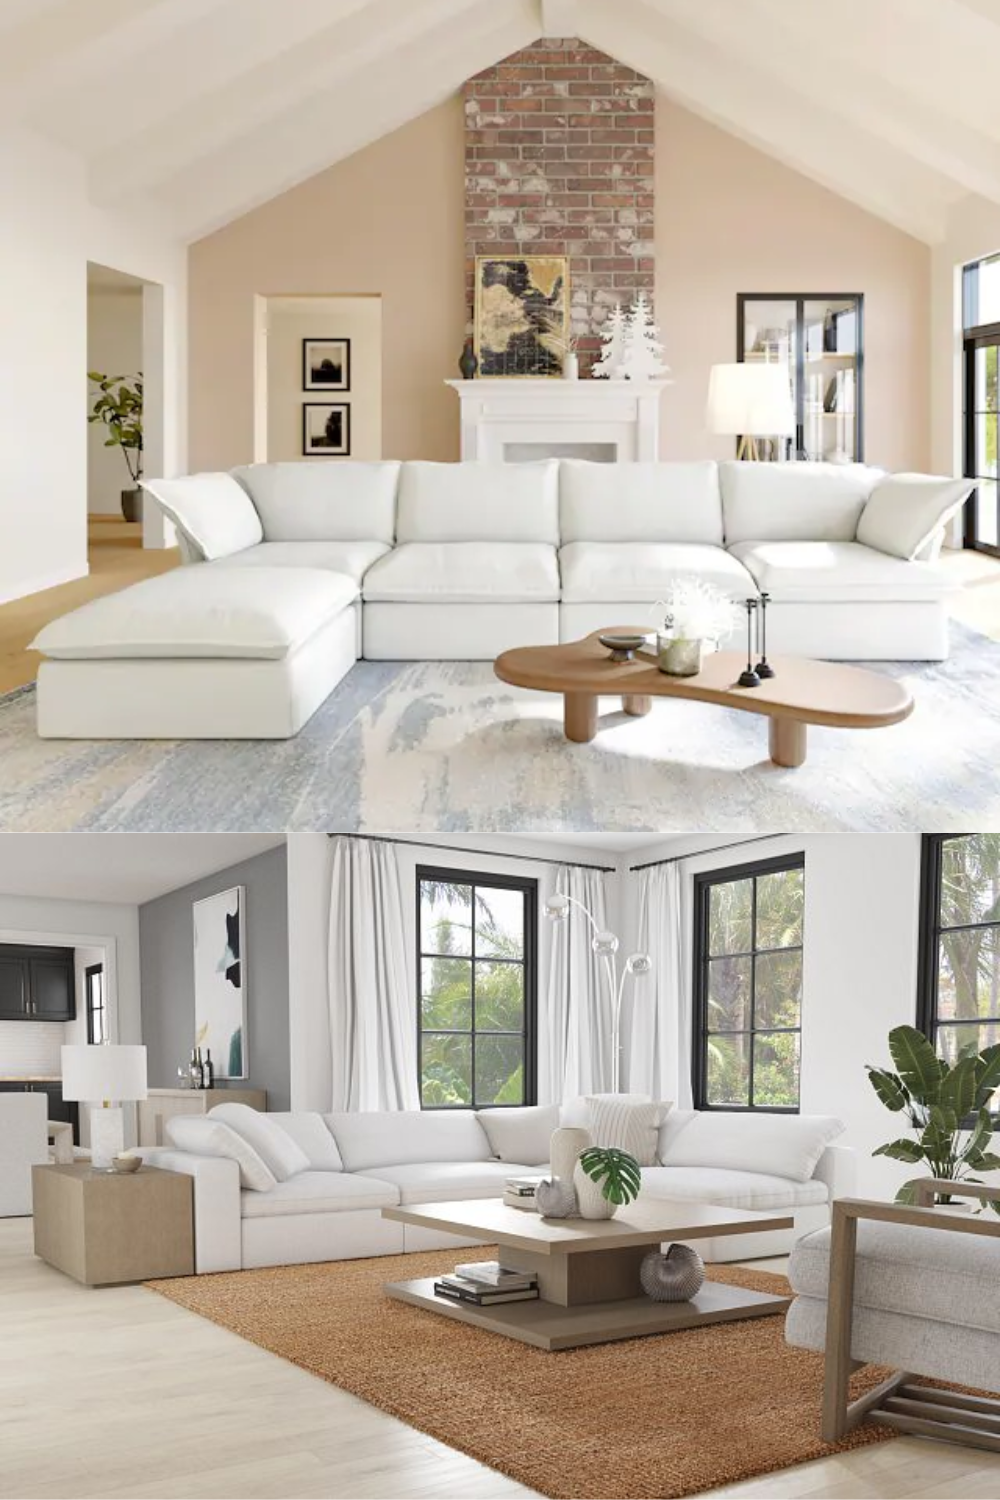 Stylish Ways to Decorate with a White Leather Sectional Sofa